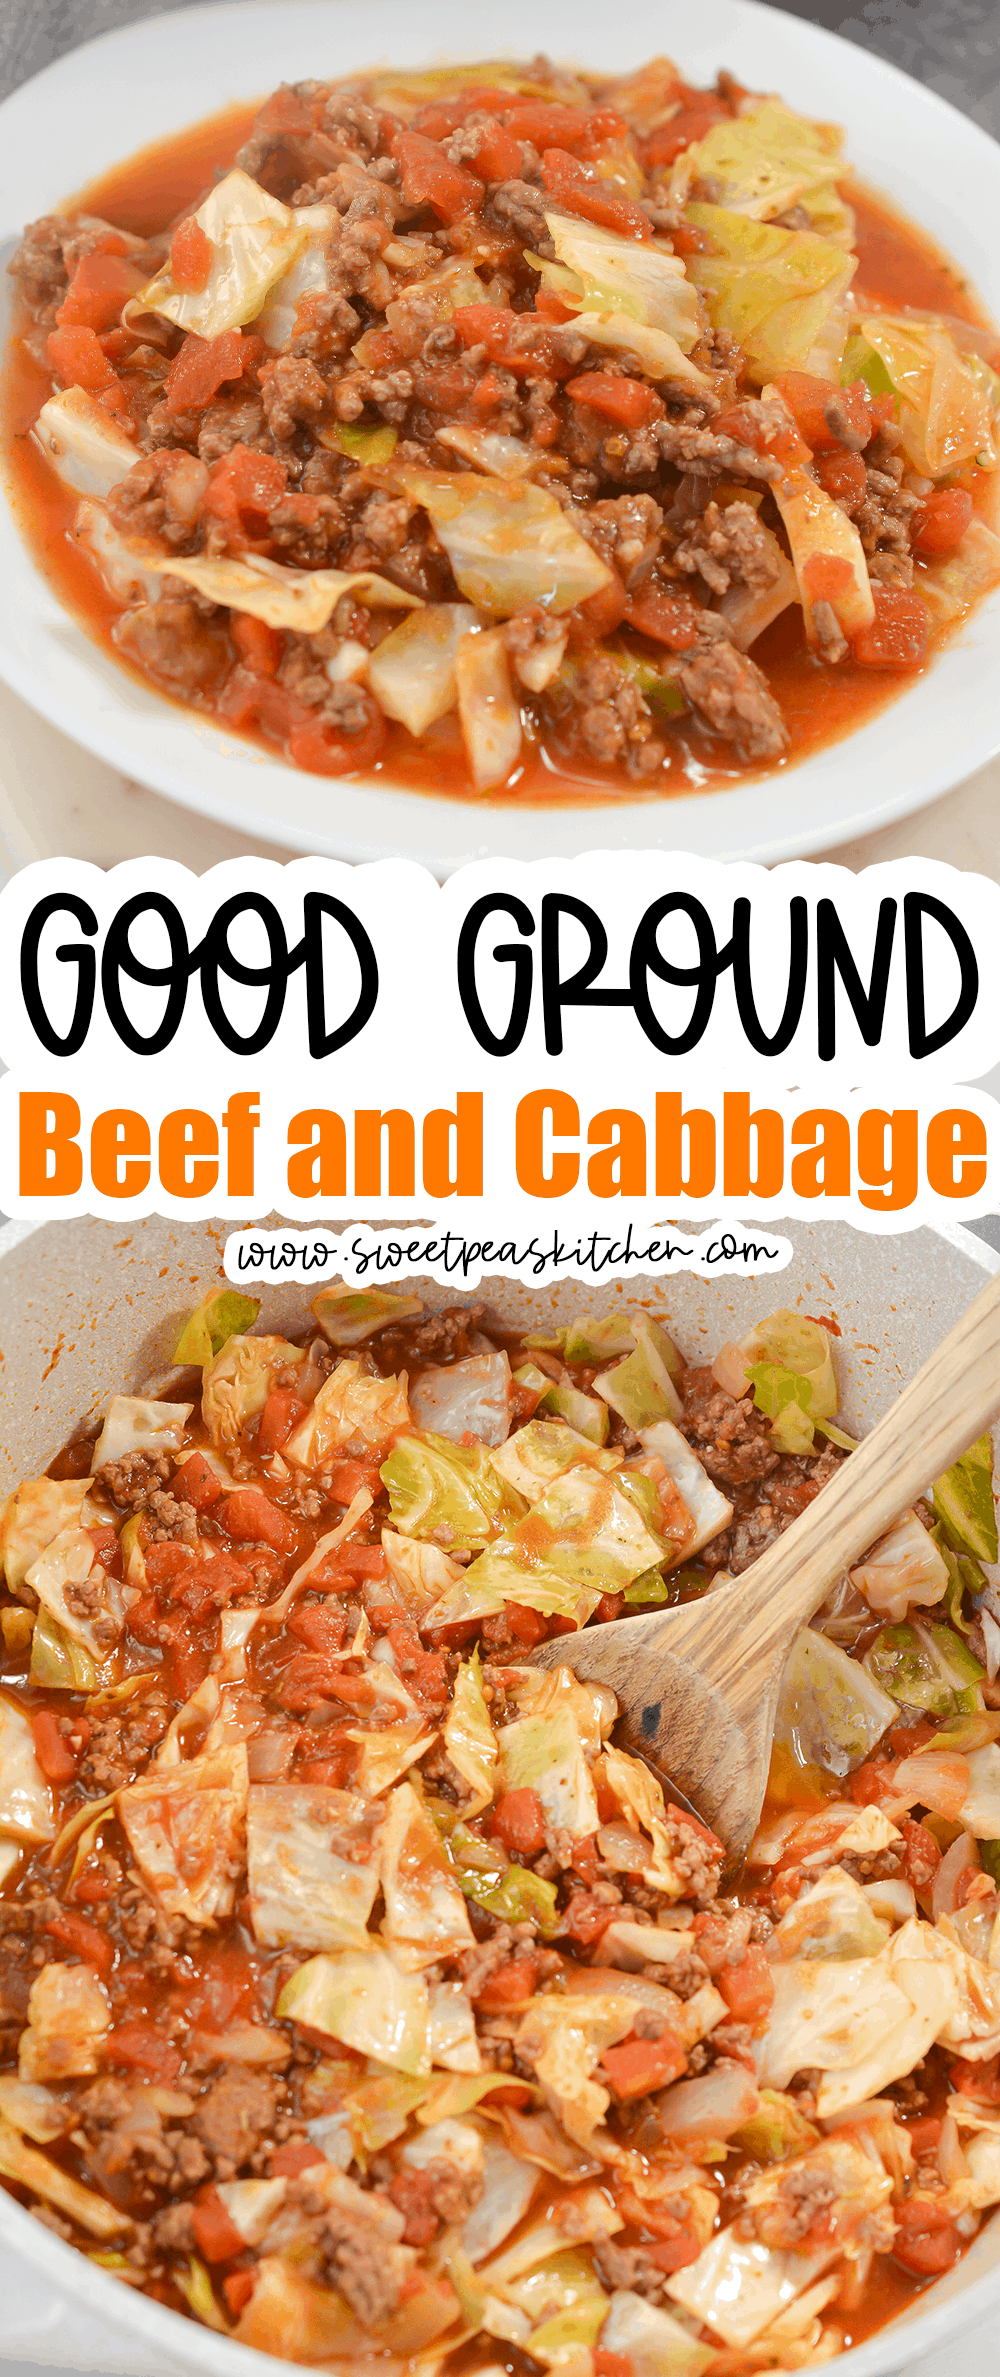 ground beef and cabbage on pinterest